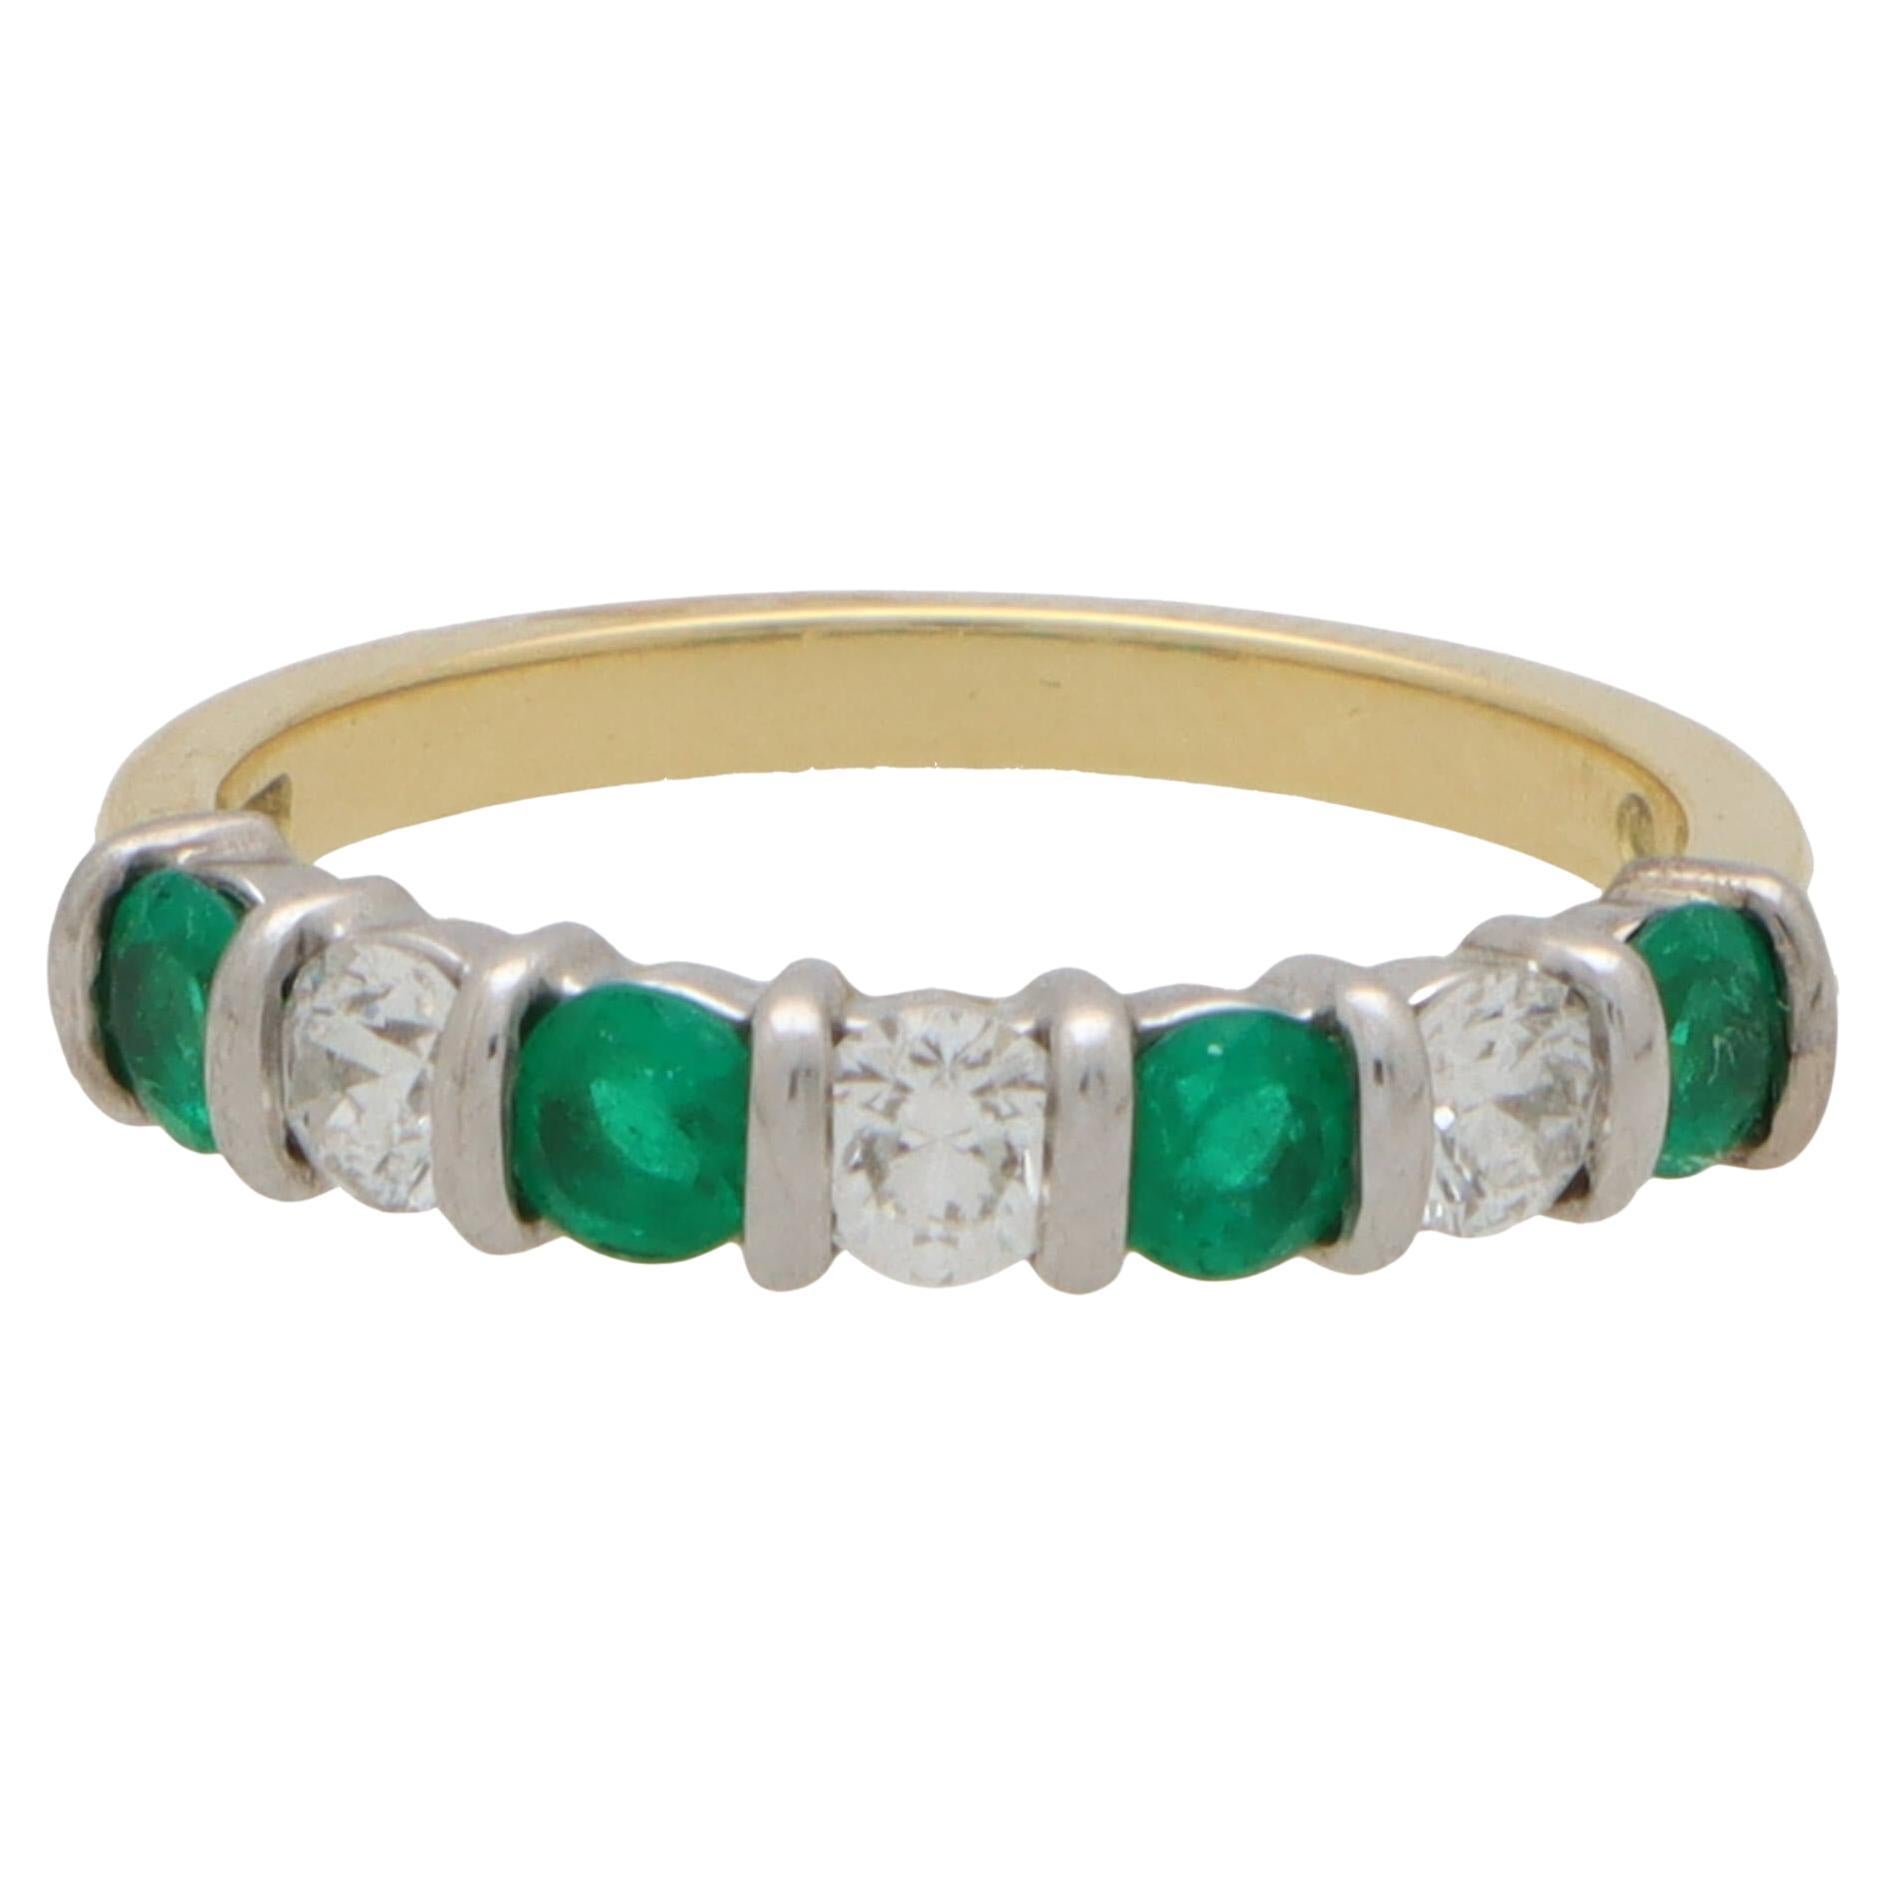  Emerald and Diamond Half Eternity Ring Set in 18k Yellow and White Gold